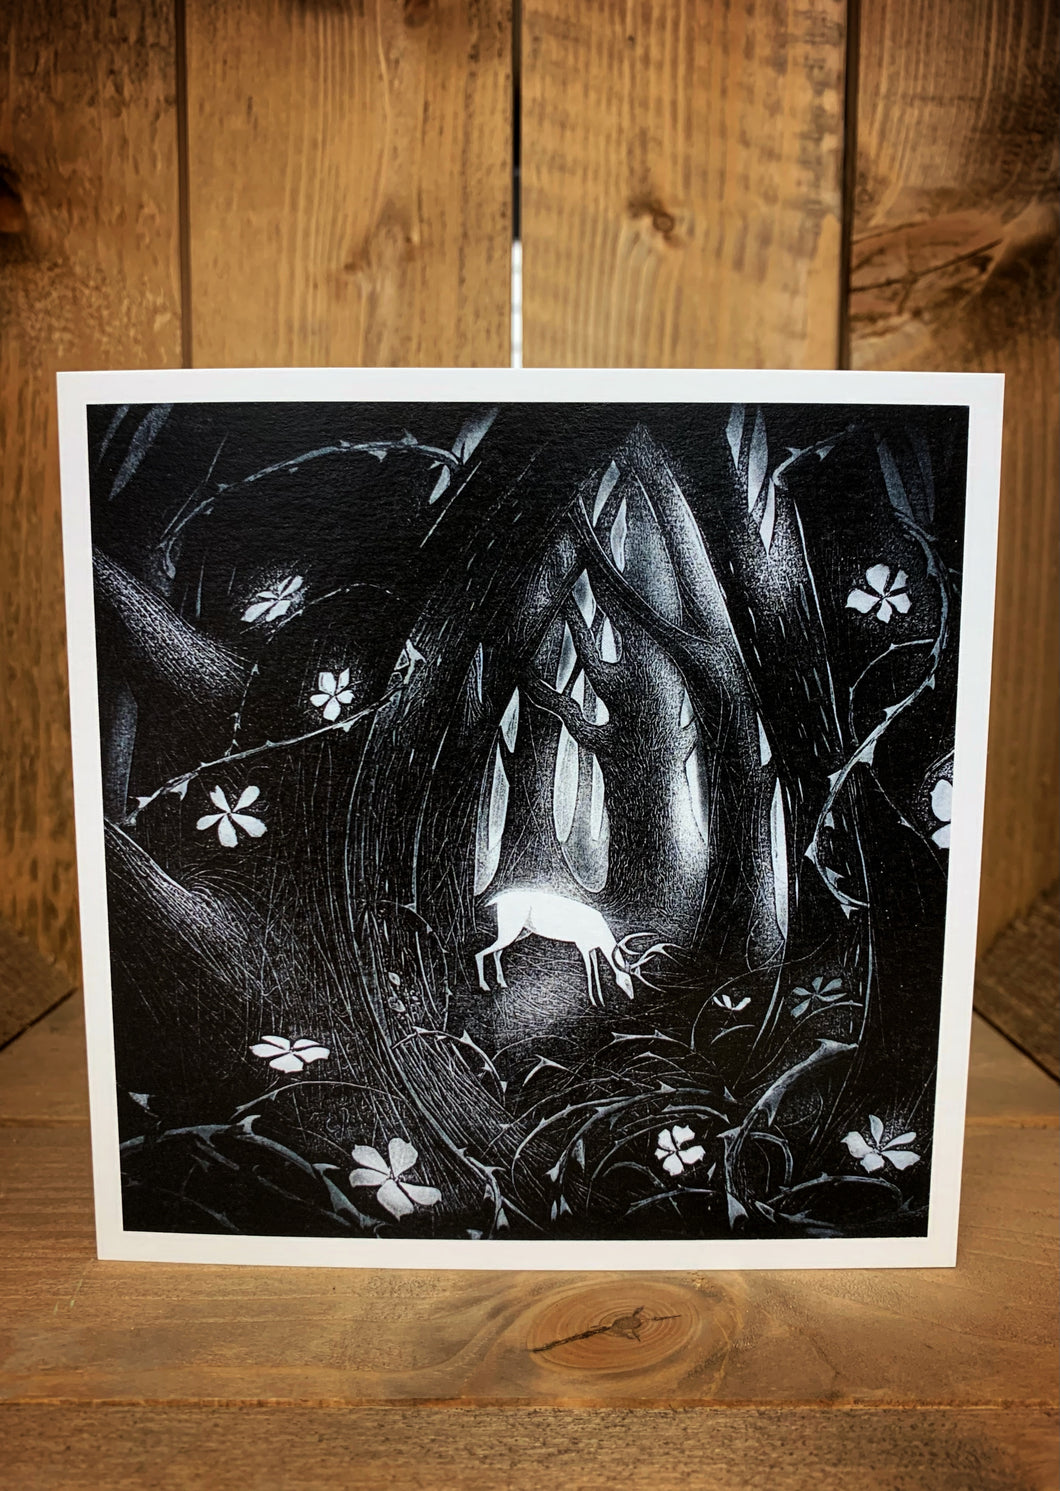 Black and white square greetings card showing a forest with a white stag in the clearing and white roses and thorns i the foreground.